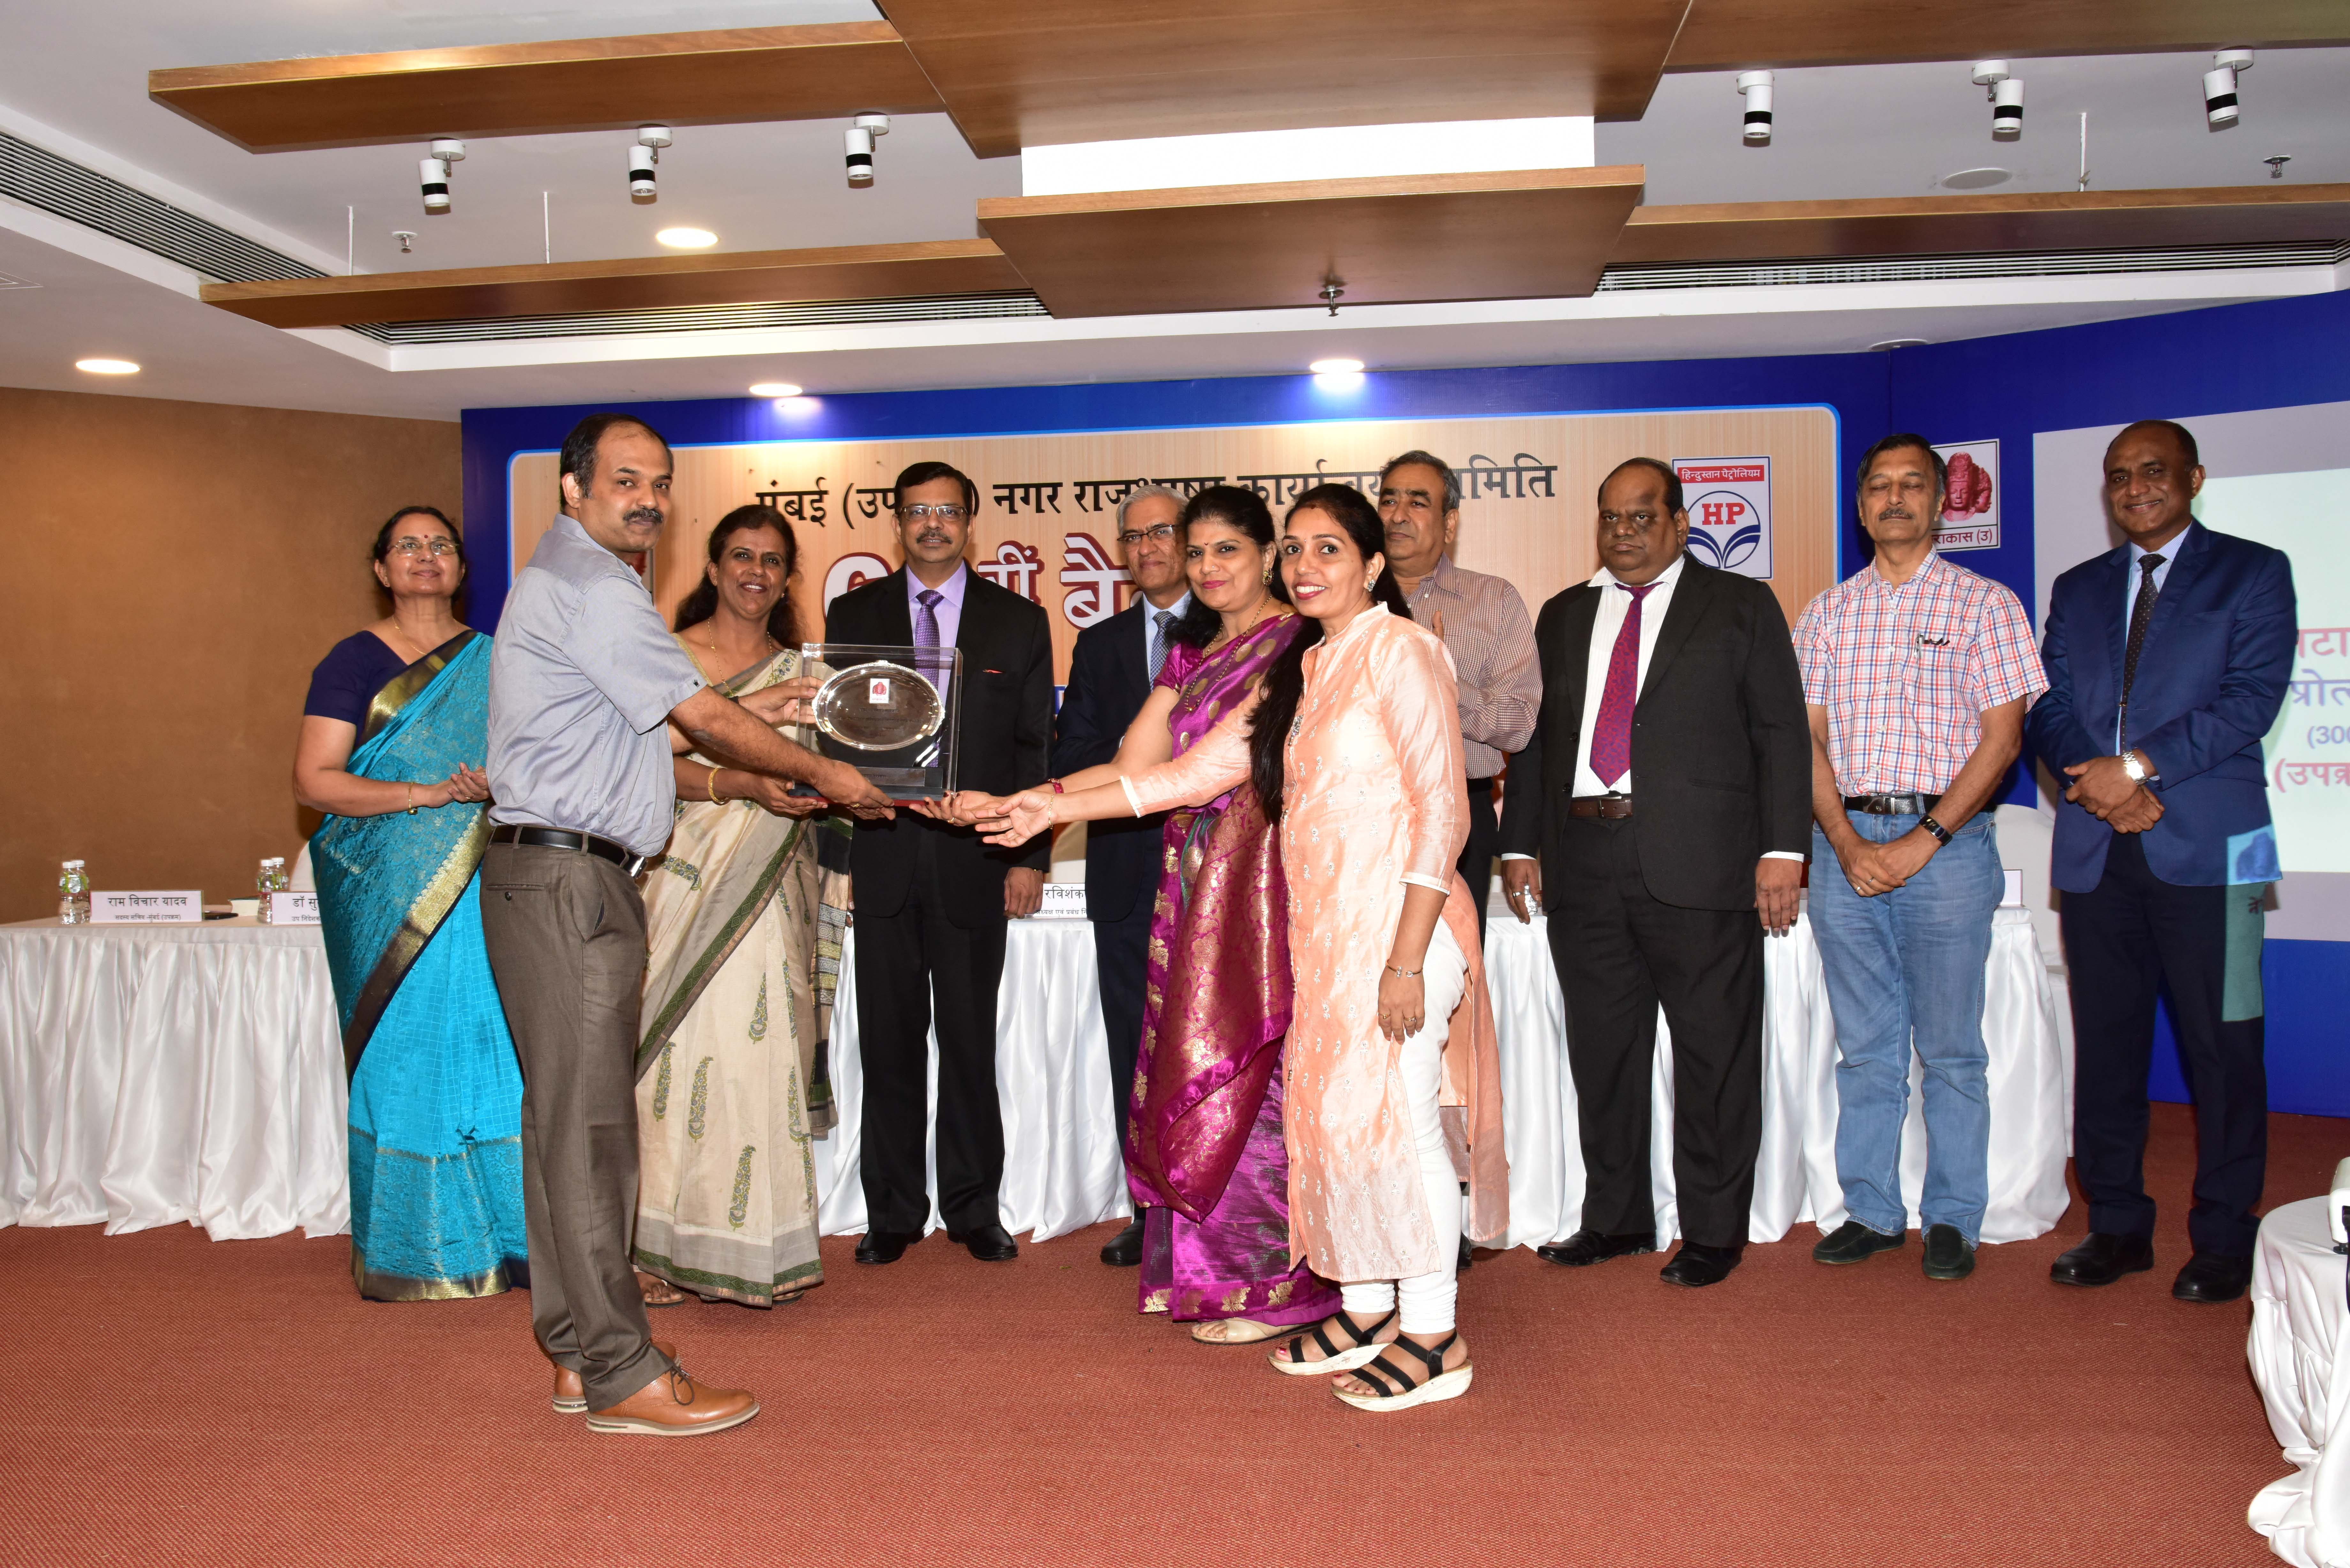 TOLIC 2018-19 : Western Regional Office, Mumbai, NTC Ltd has received the award of the TOLIC for the year 2018-19. This award belongs to all the workers / employees of the corporation and the official category. This award was received by Chief General Manager/Office-In-Charge Sh. Manoj Kumar and Rajbhasha Incharge Smt. Manali R. Sansare.